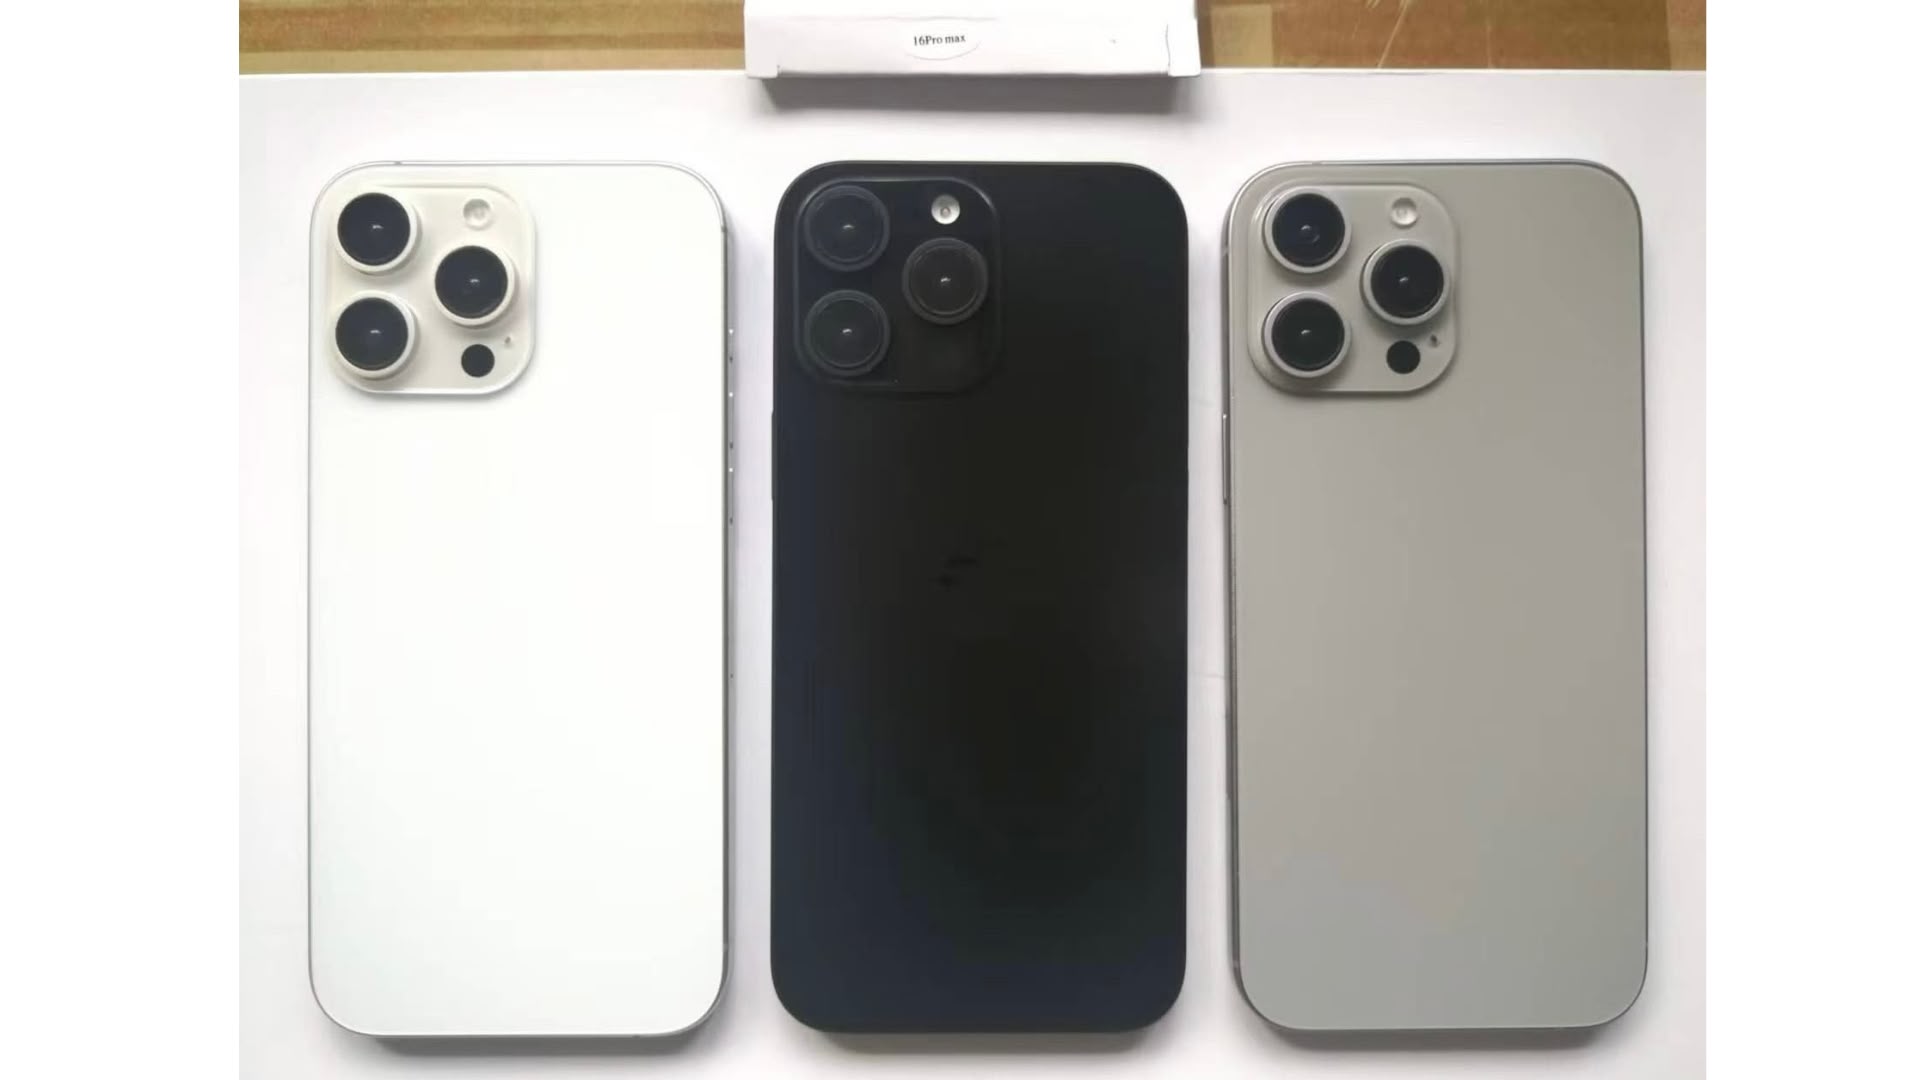 iPhone 16 Pro White, Gray, and Dark Black Colors Shown in New Image